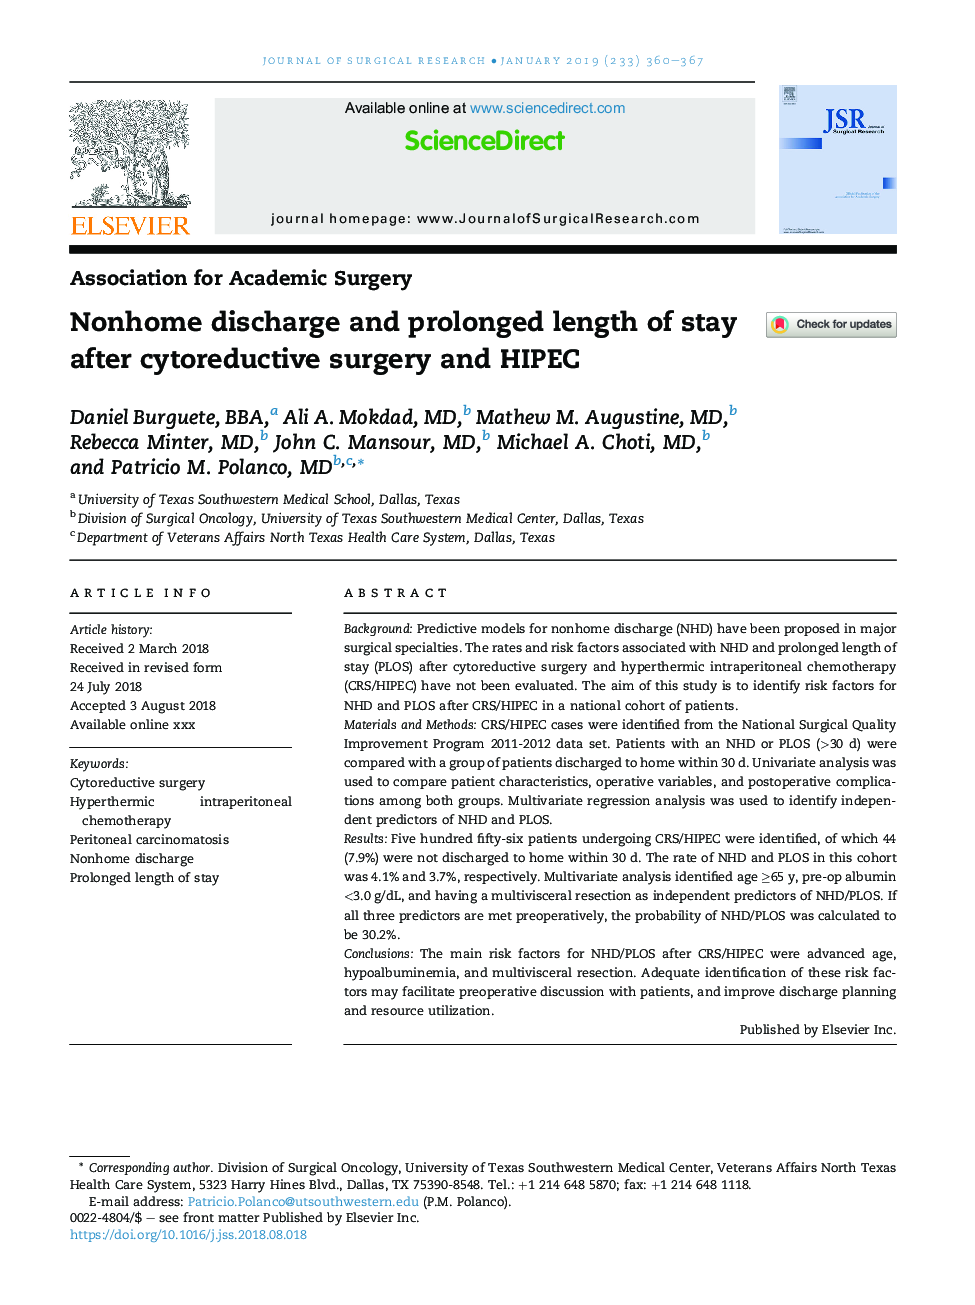 Nonhome discharge and prolonged length of stay after cytoreductive surgery and HIPEC